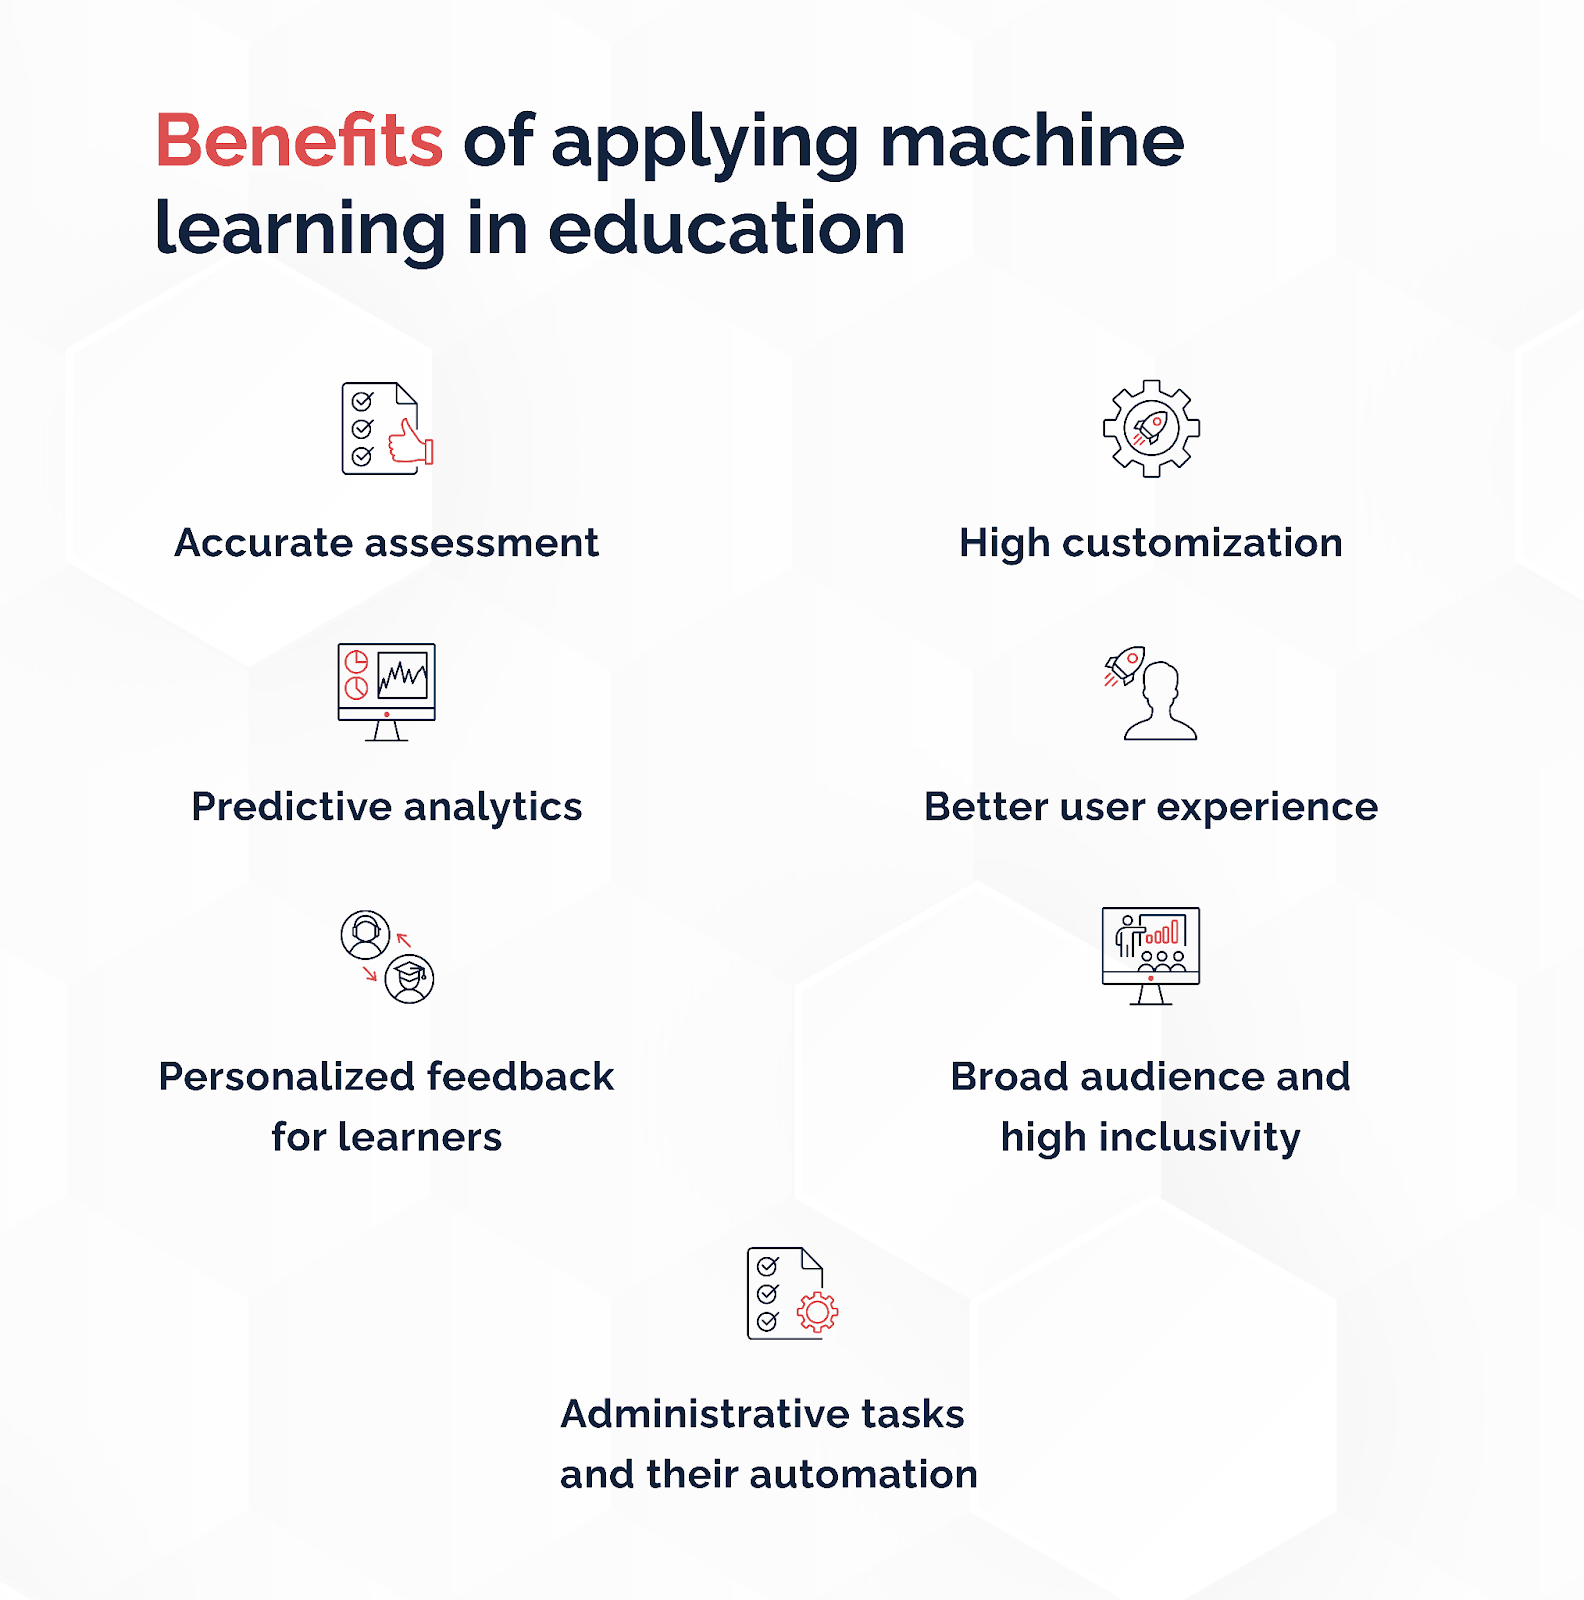 Benefits of Applying Machine Learning in Education